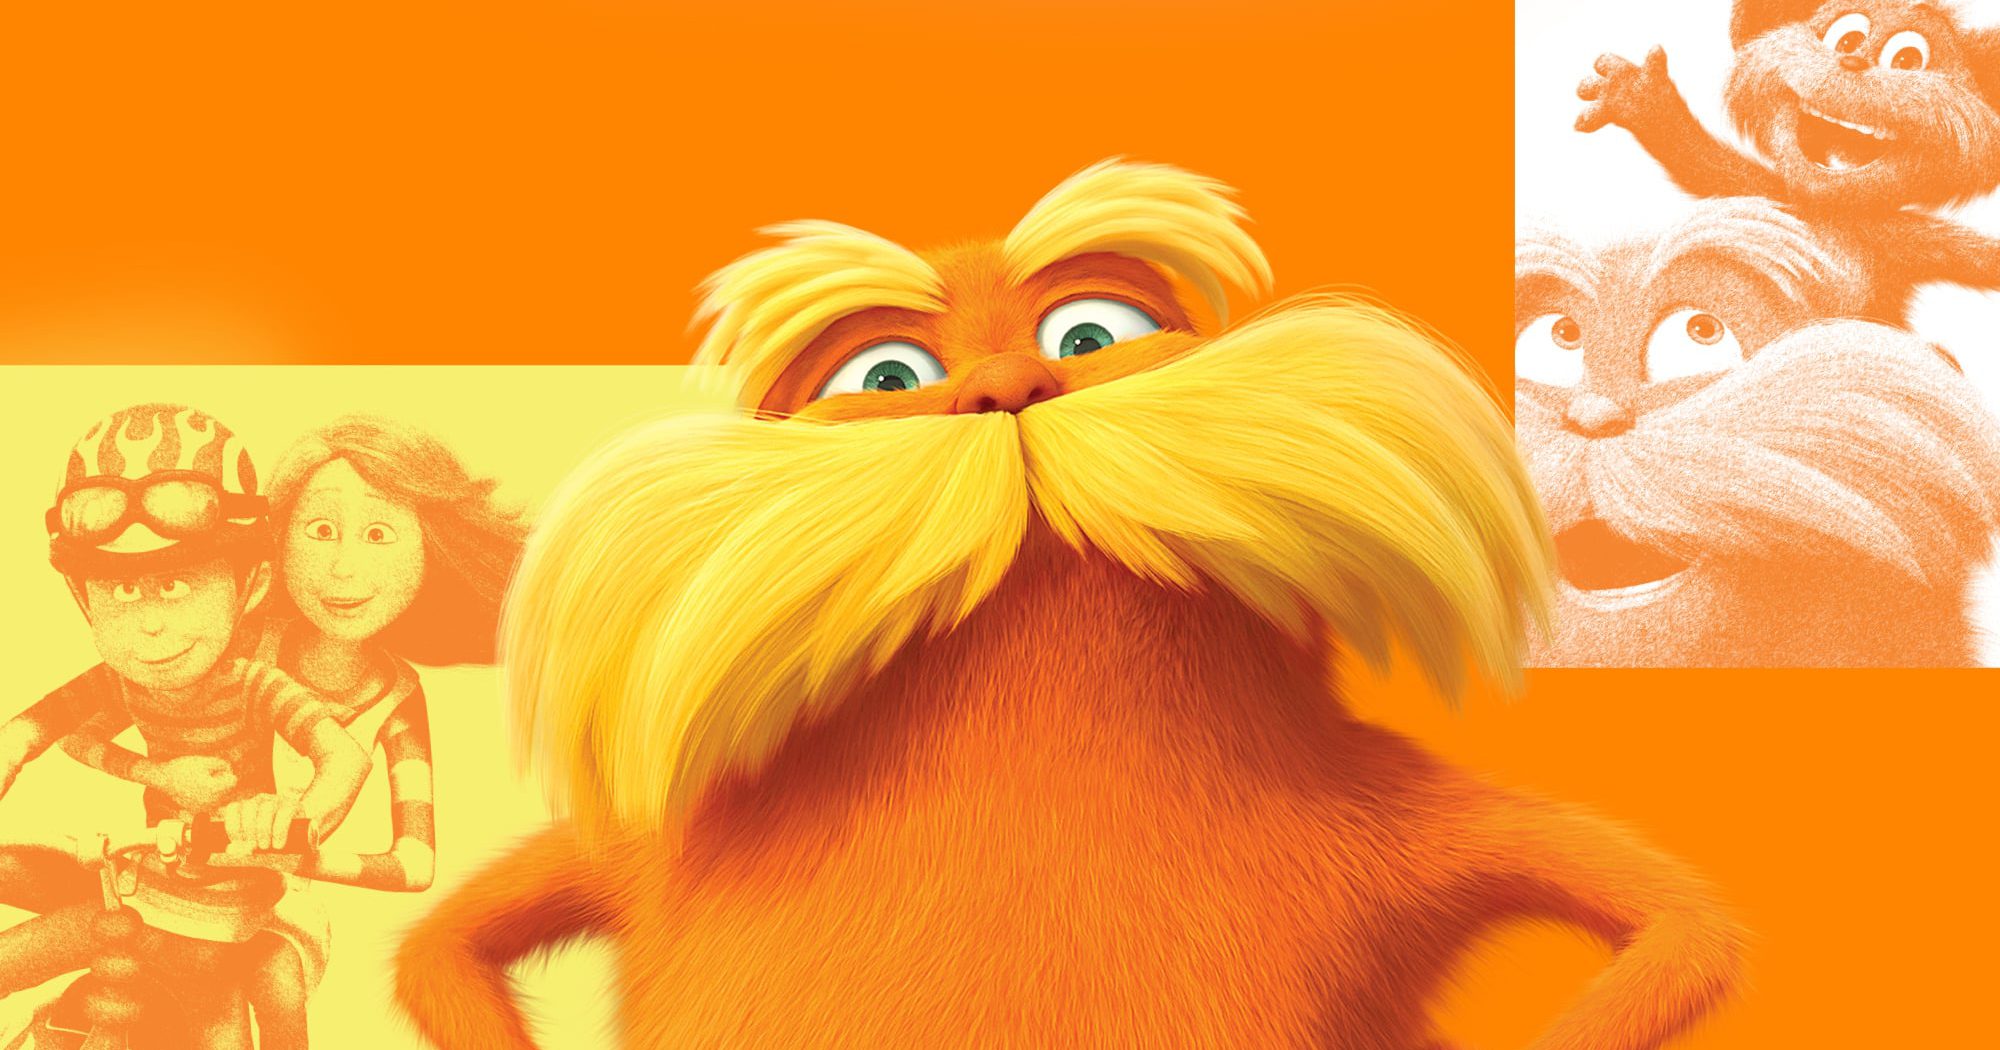 Poster for the movie "The Lorax"